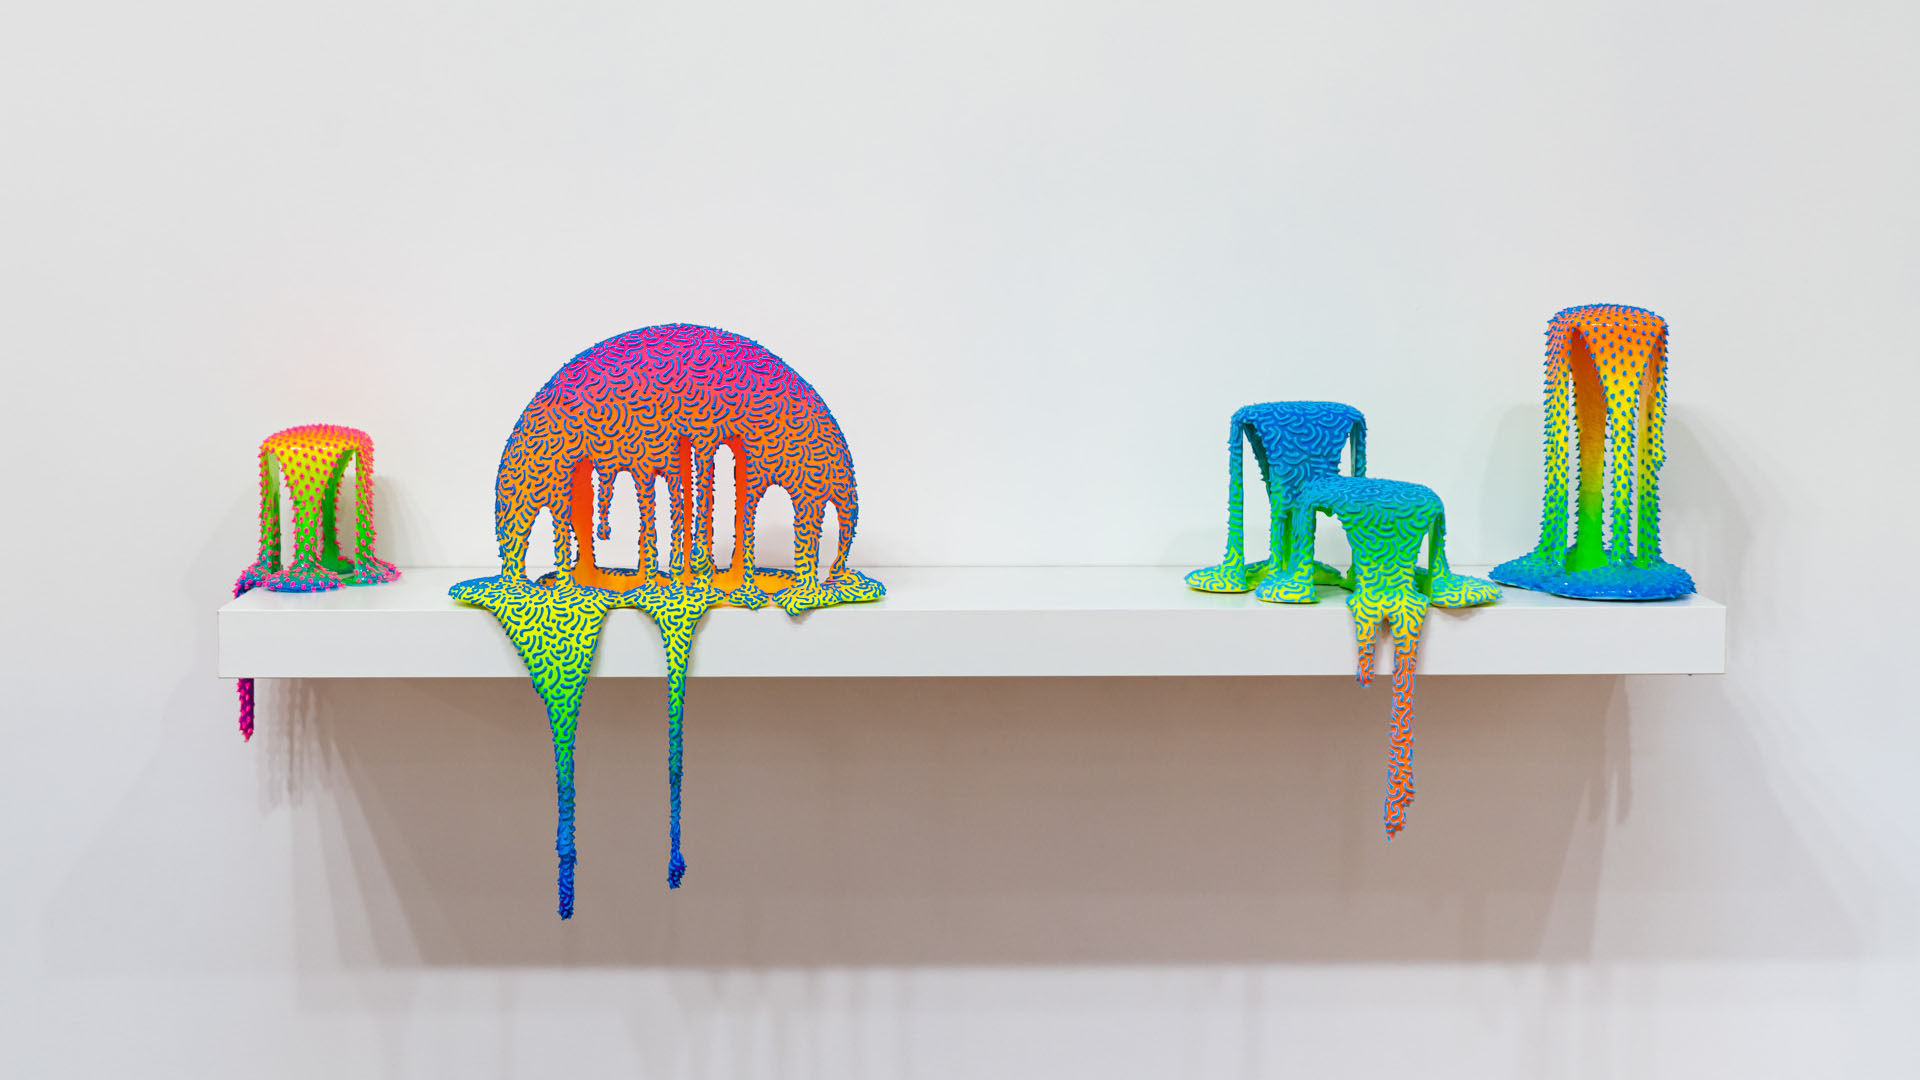 Dan Lam Sculptures, Cosmic Shake Exhibition Images by Mario Gallucci for Chefas Projects